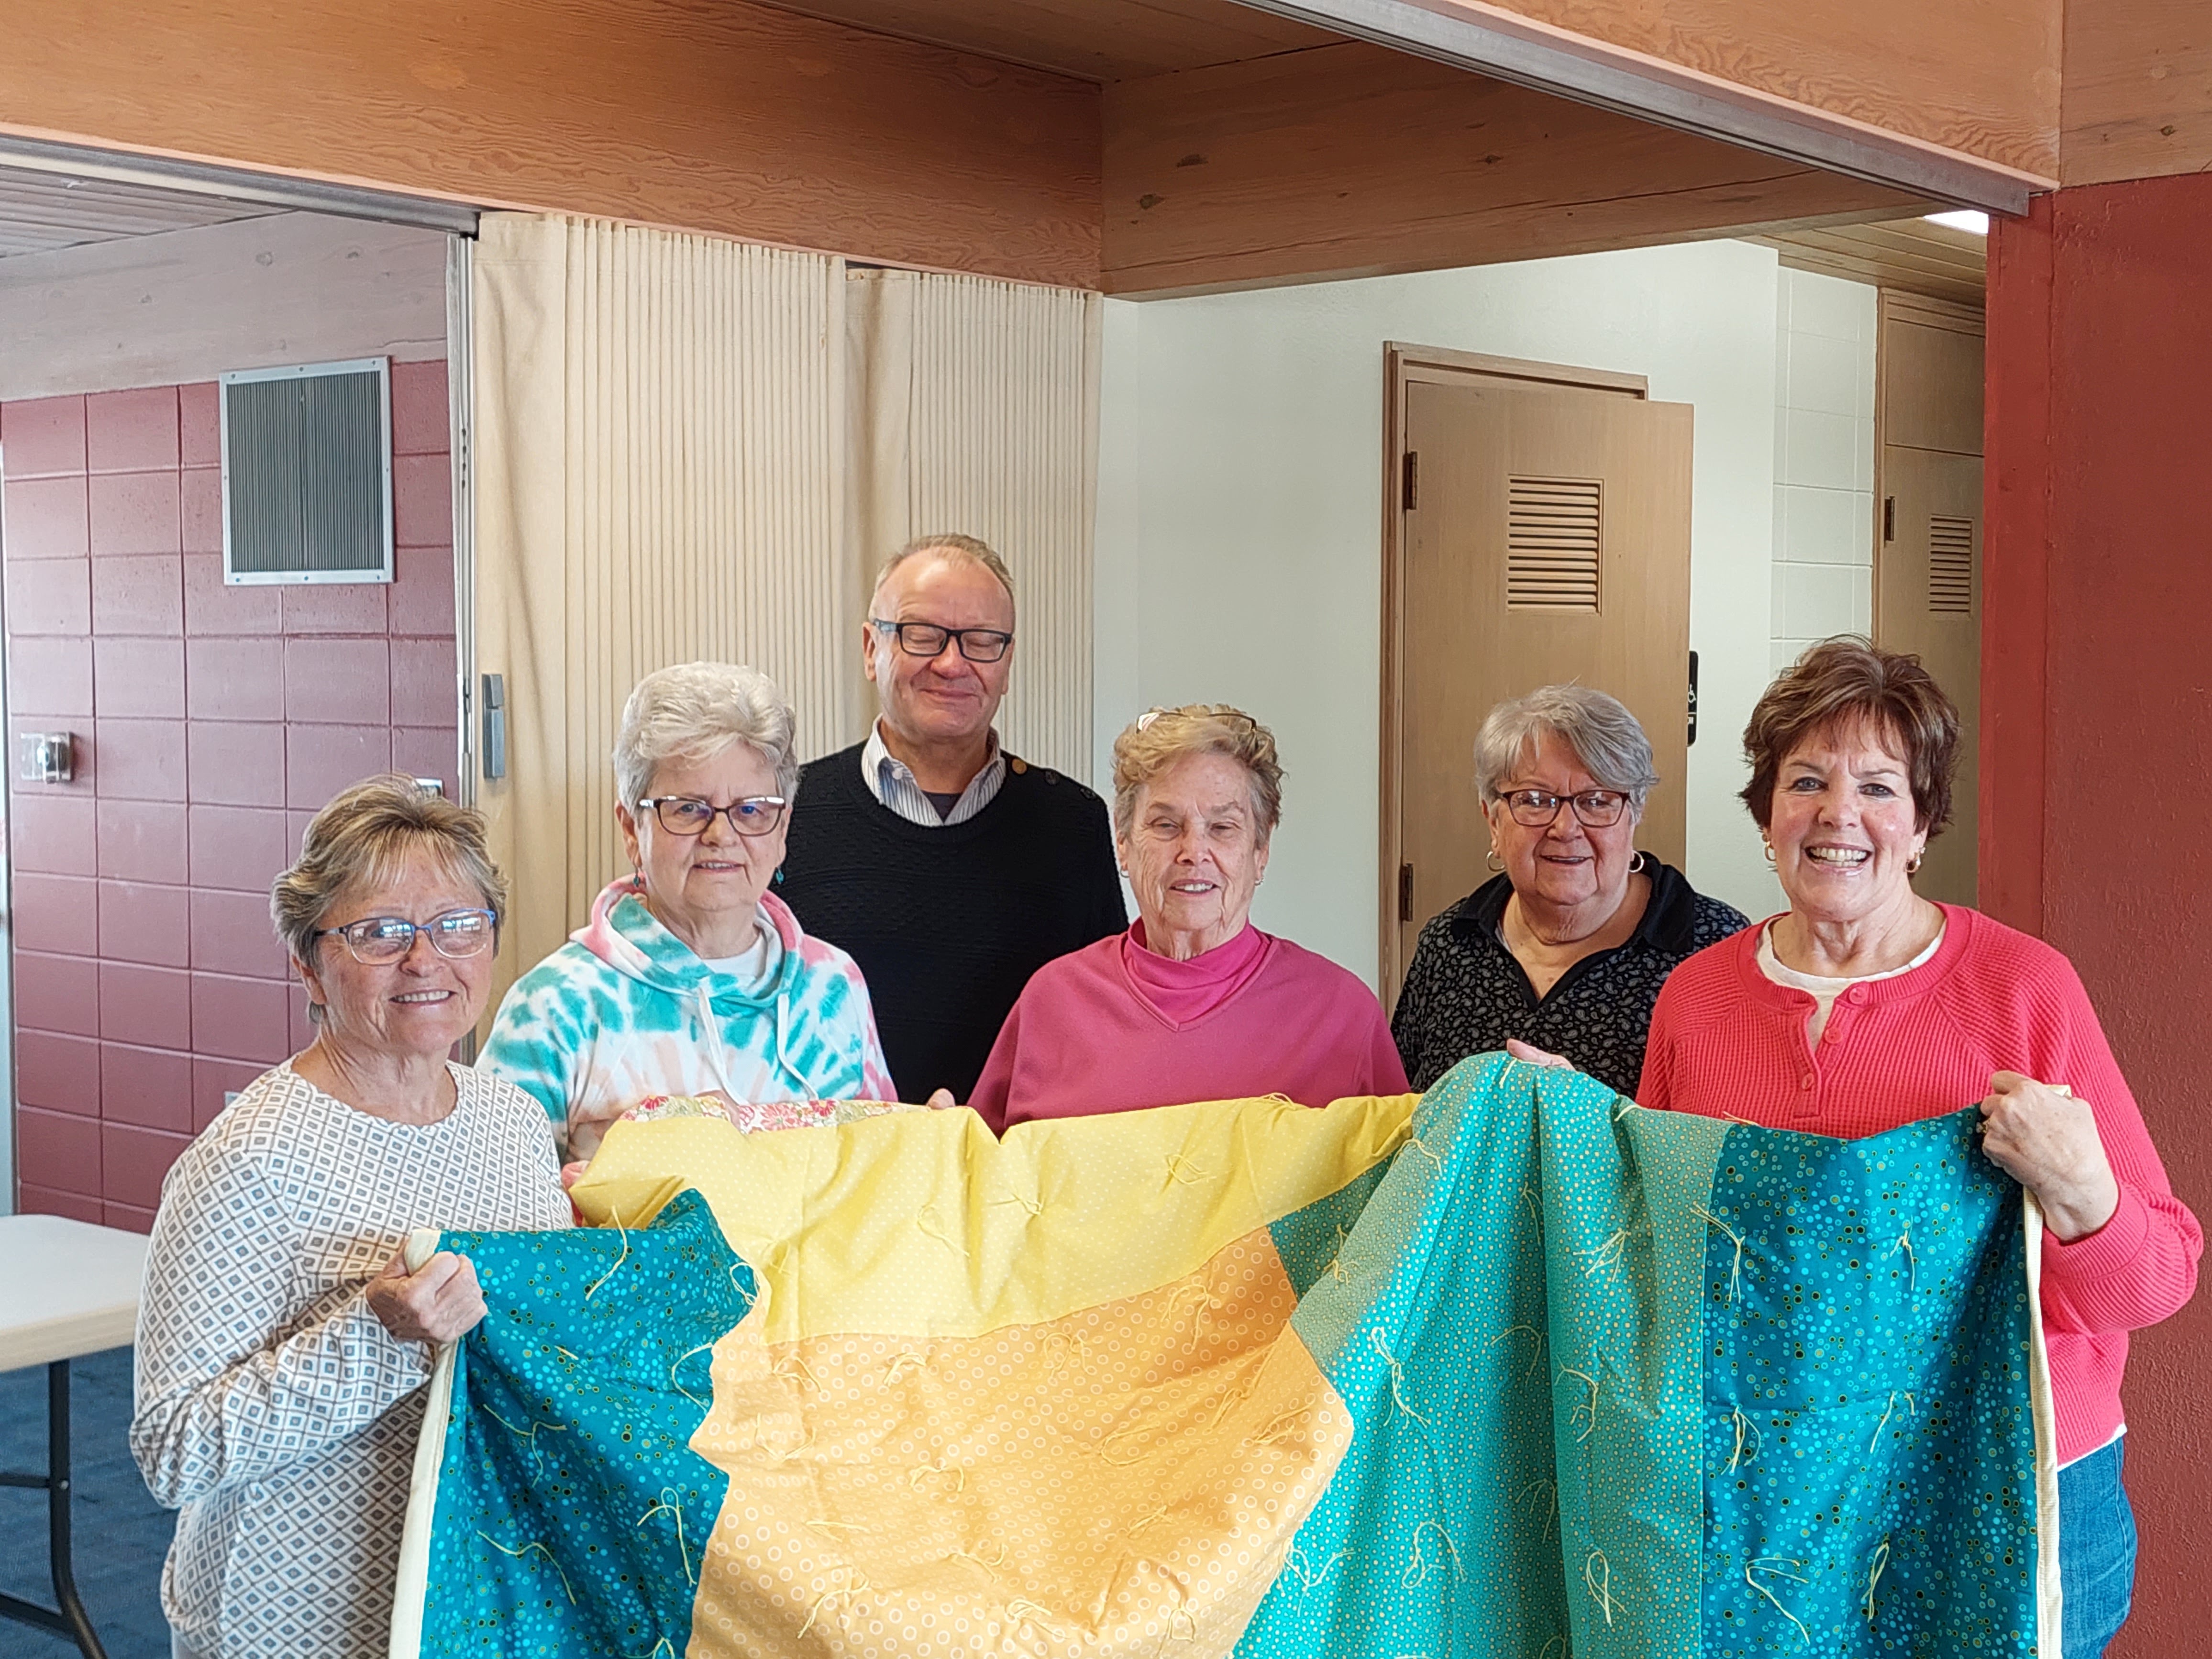 Dr. Gretebeck and the quilting team